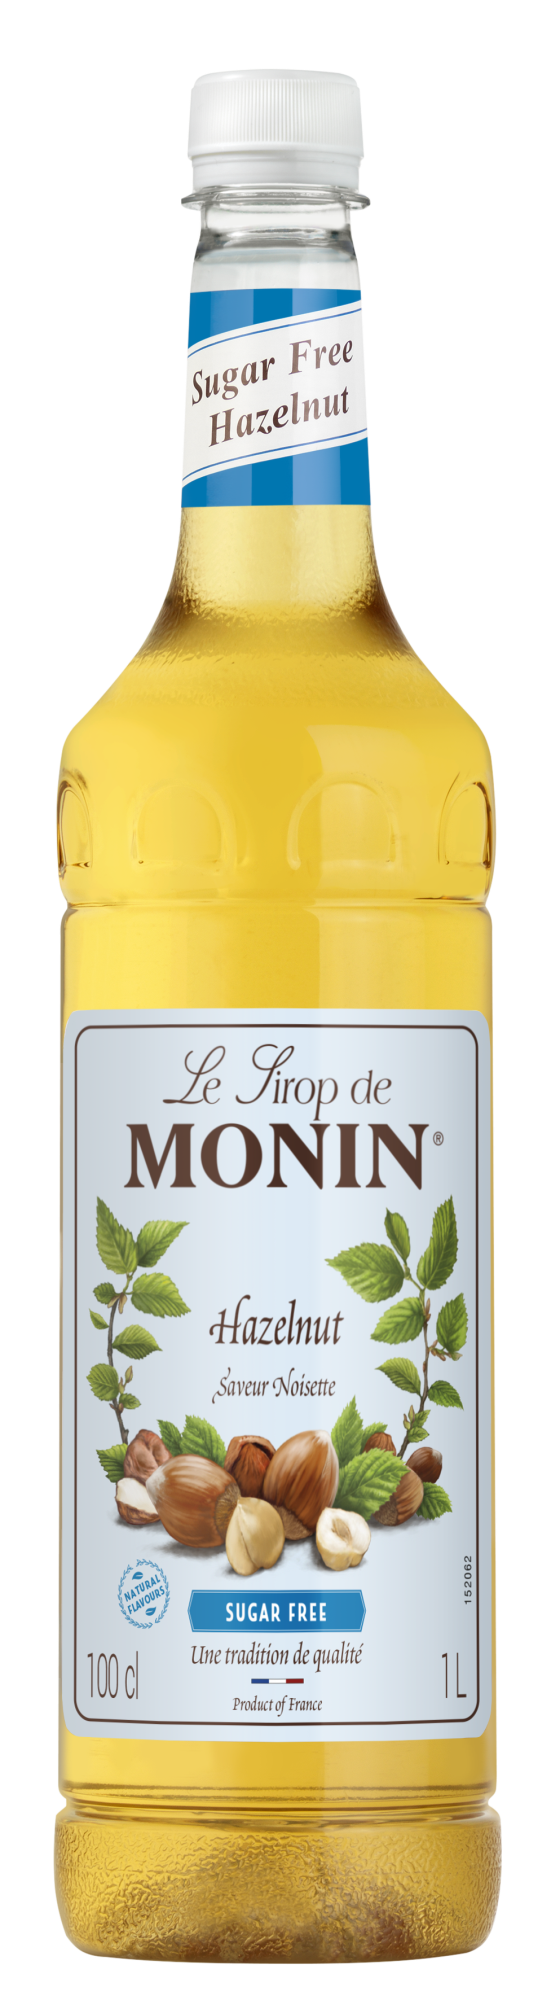 Buy MONIN Hazelnut Sugar Free Syrup. It brings a rich and luxurious taste and aromas to your beverages especially in hot chocolates.